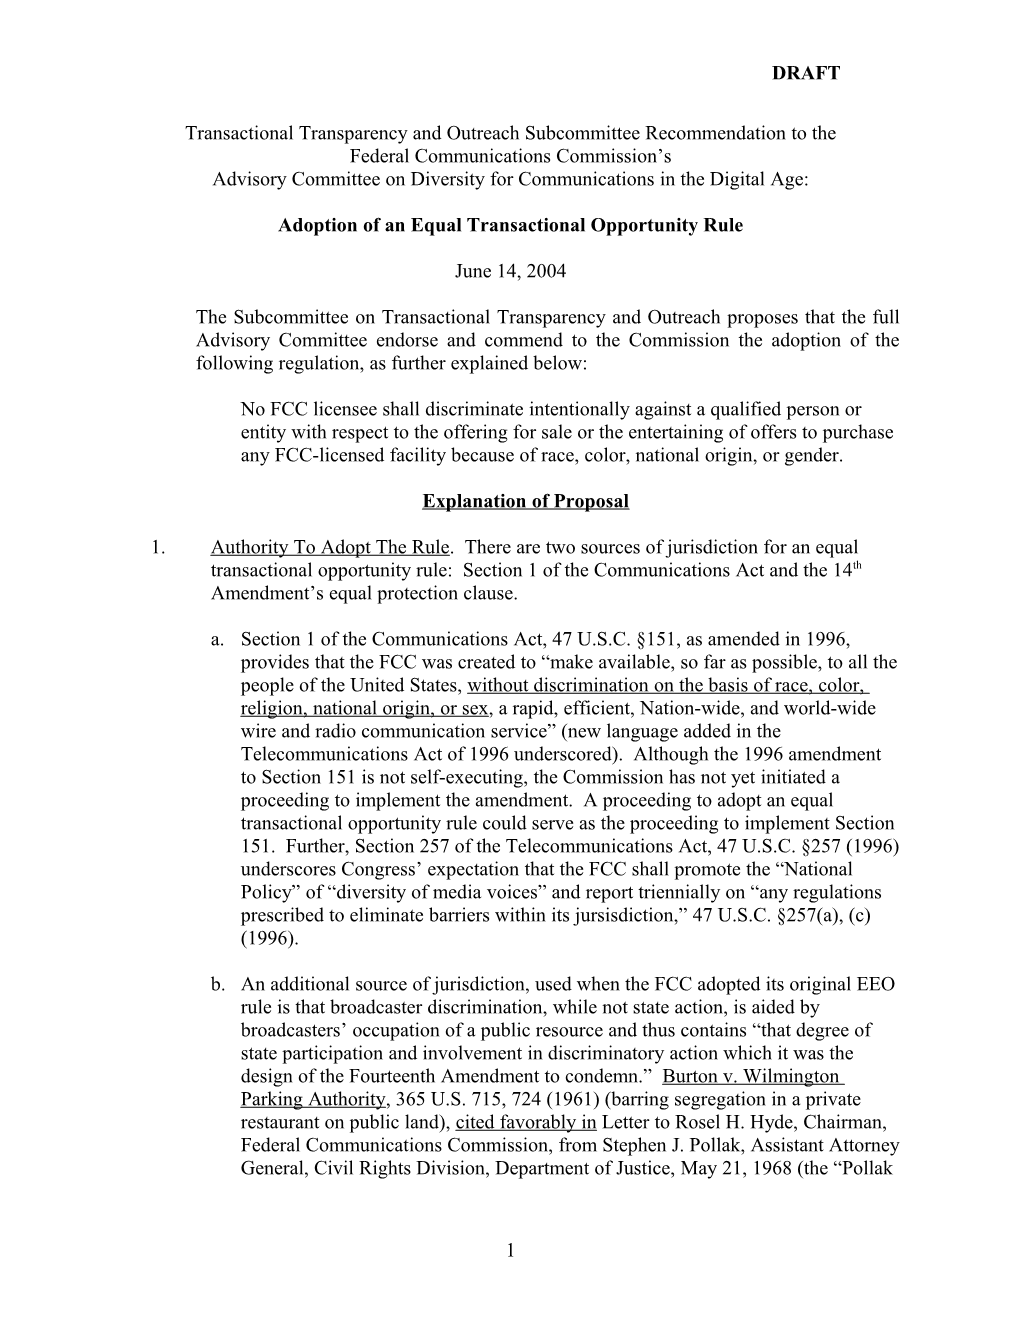 Transactional Transparency and Outreach Subcommittee Recommendation to The